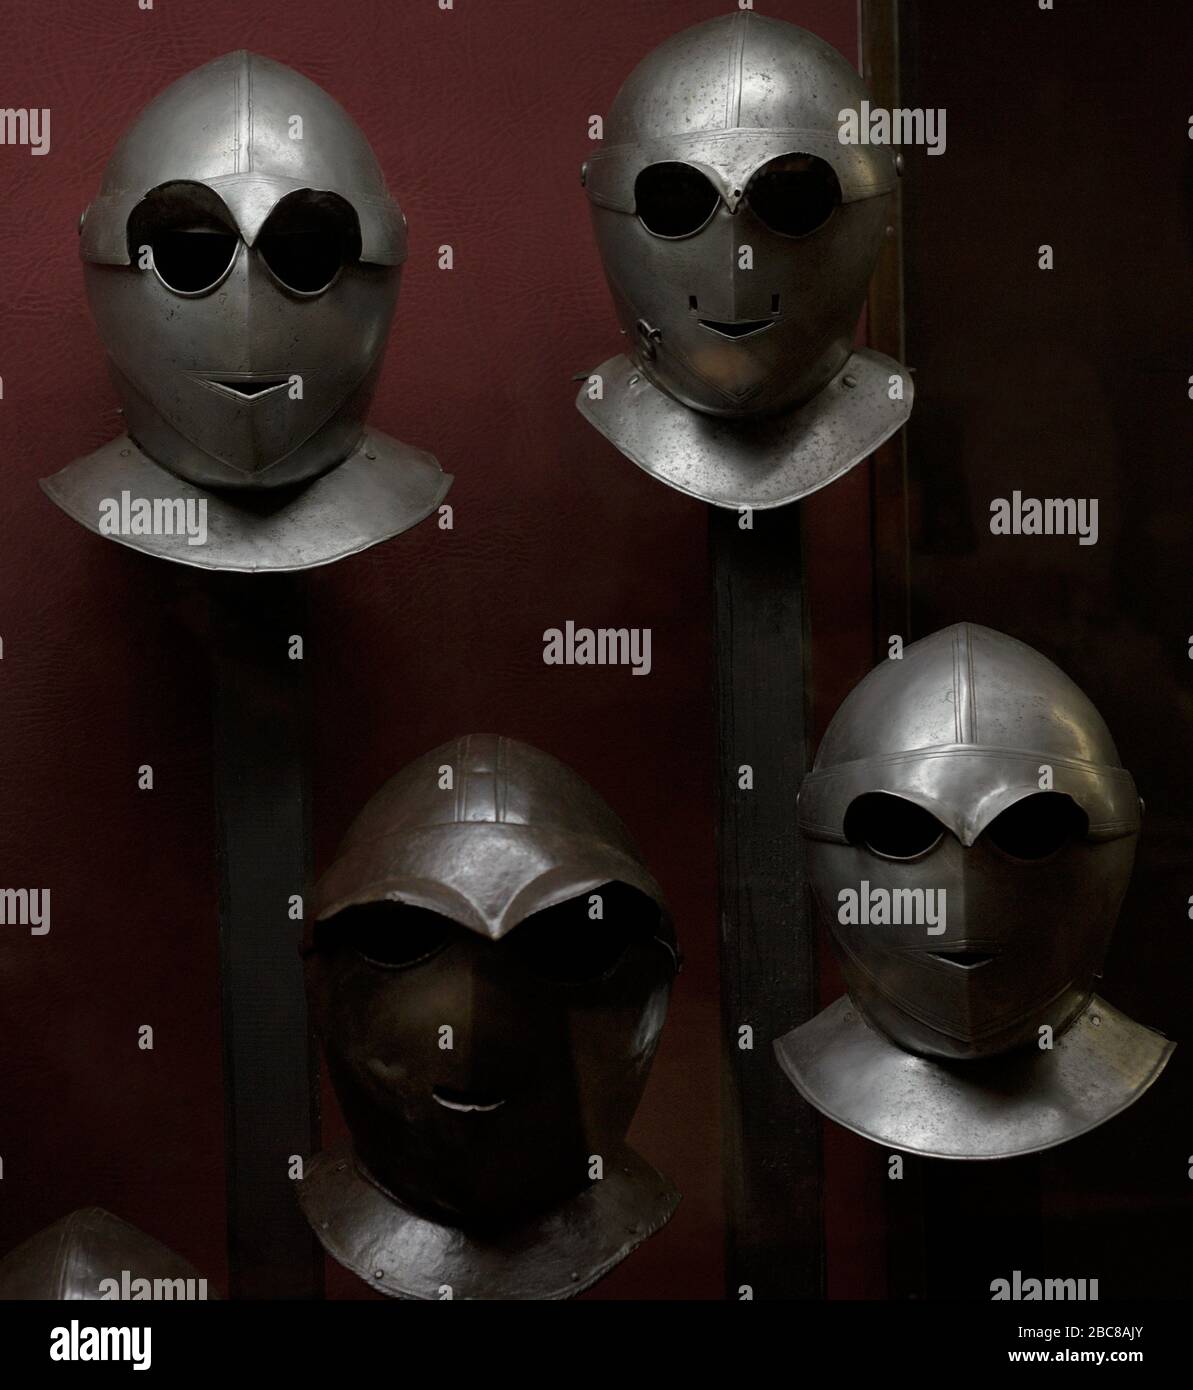 Savoyard-style close helmets or Totenkopf. Complete the armour of the cuirassiers or the heavy cavalry. North Italy. Ca.1600-1630. Armoury. Grandmaster Palace. Valletta. Malta. Stock Photo